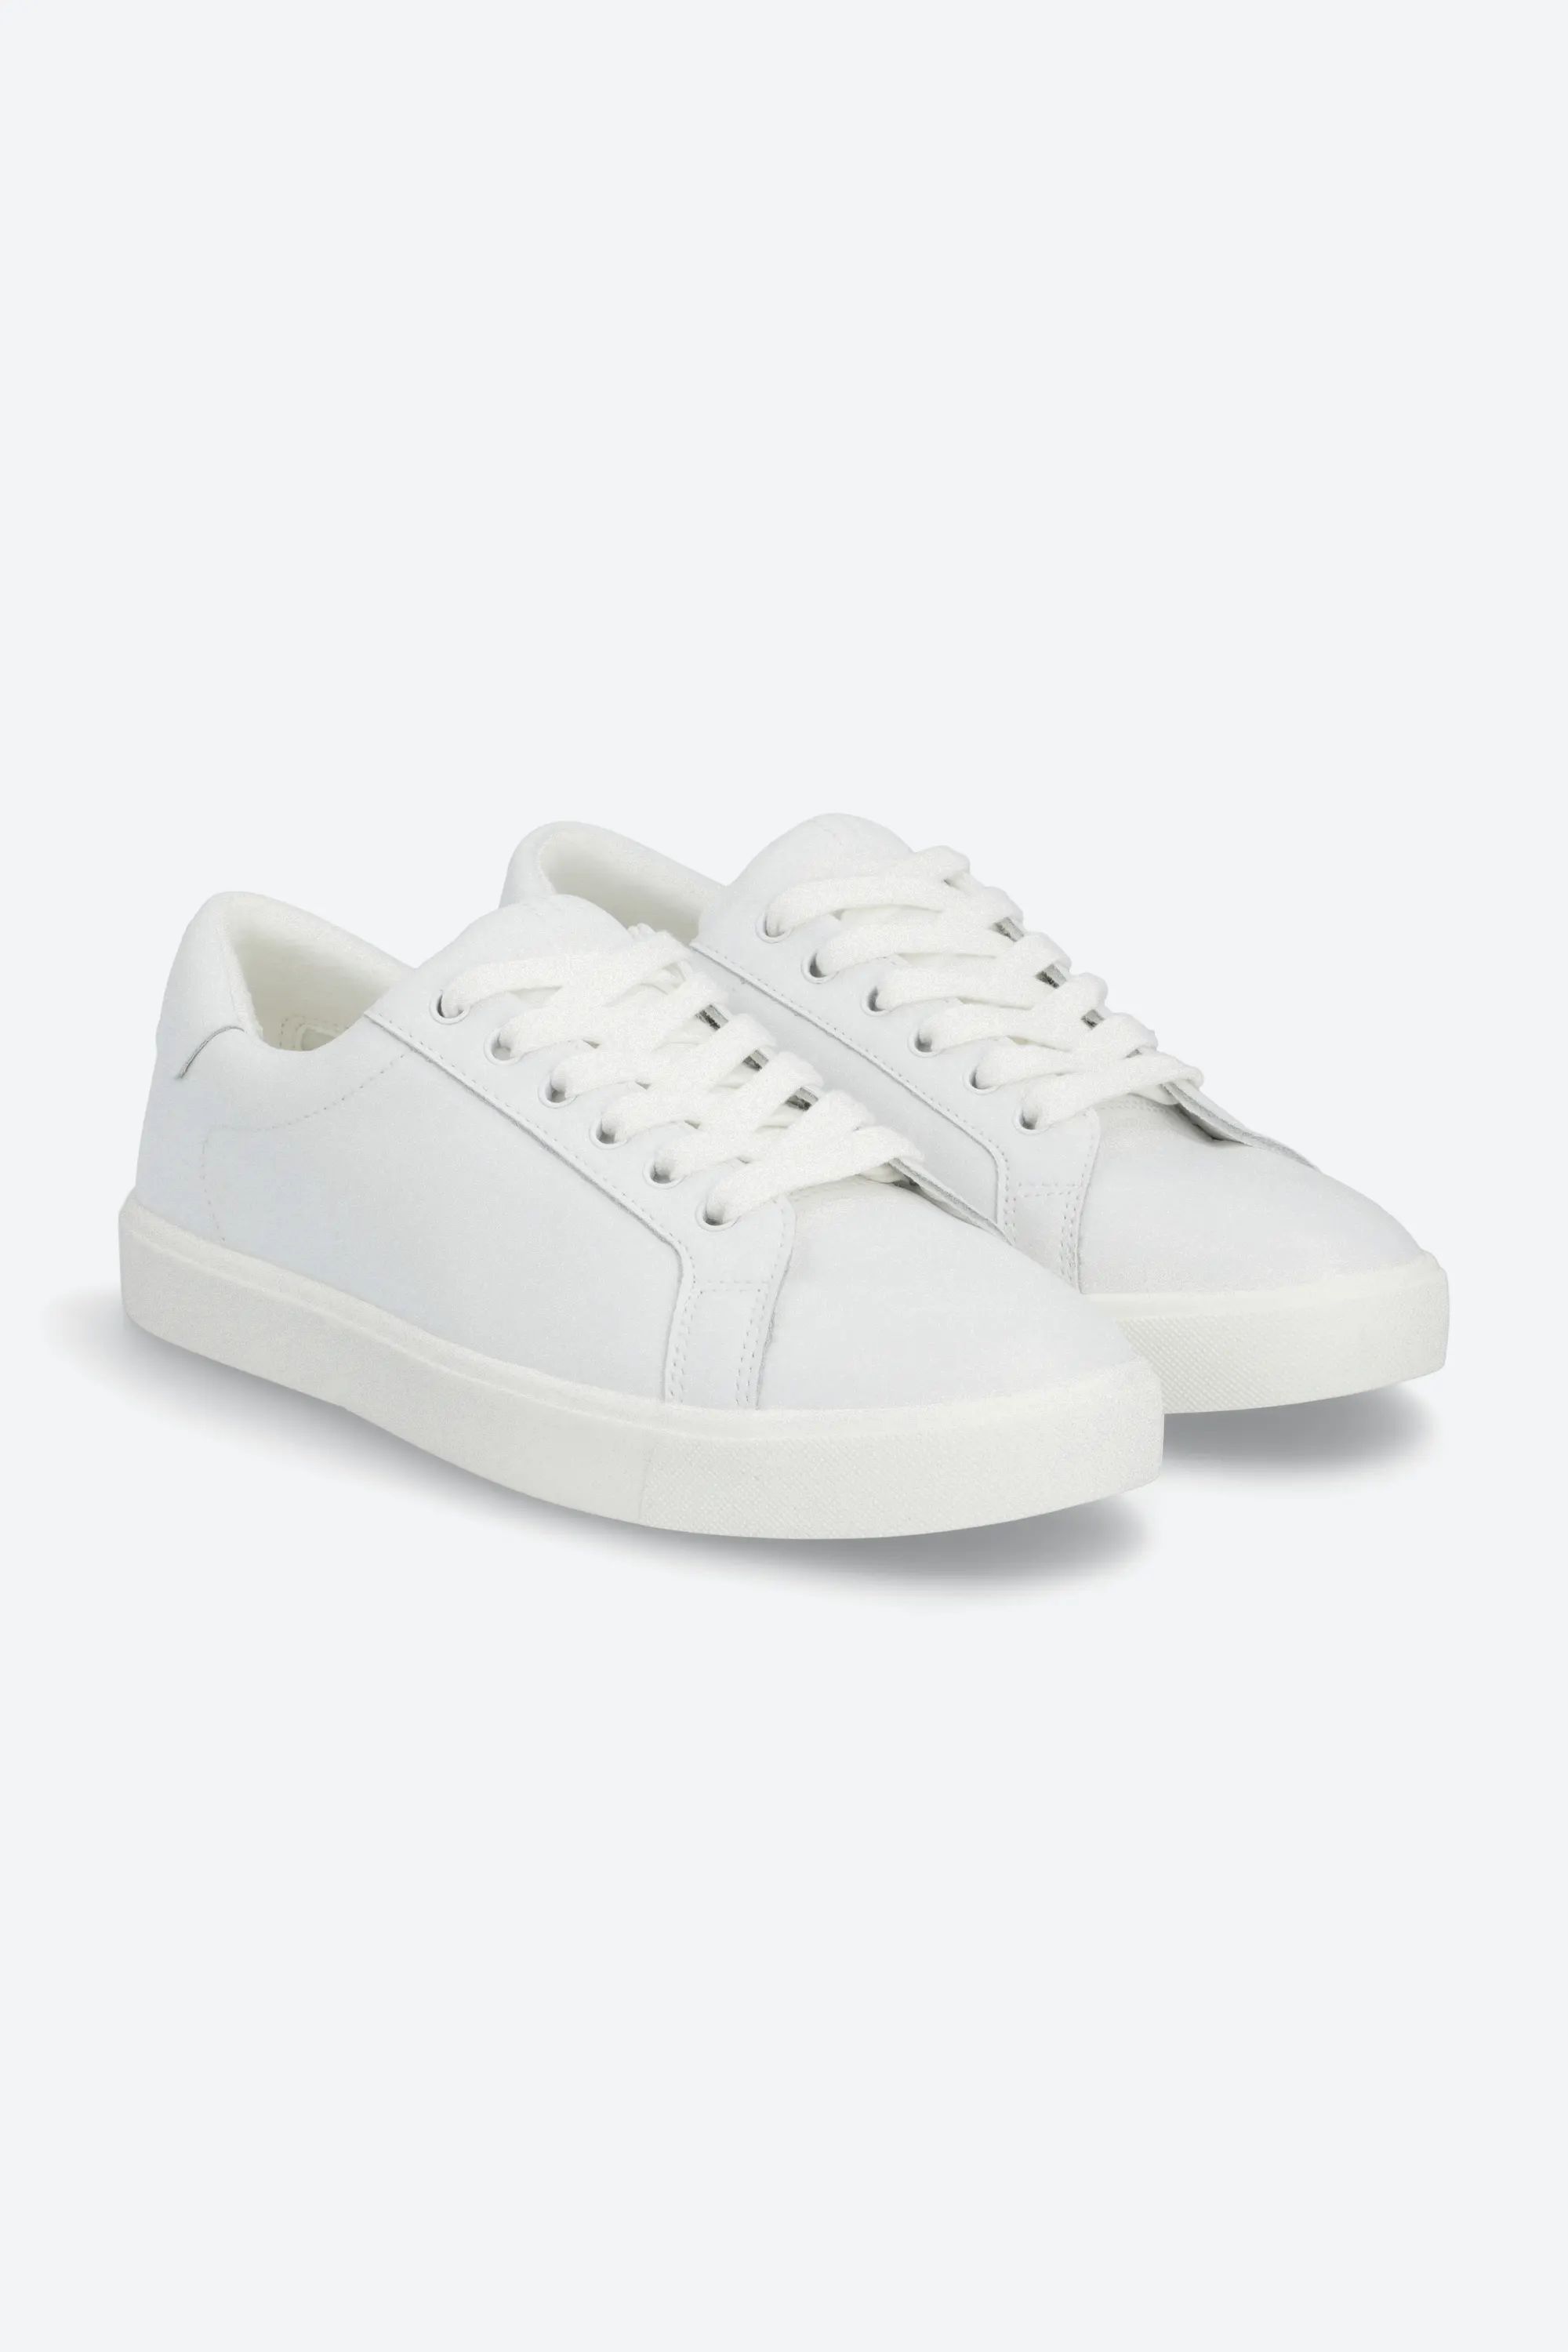 Ethyl Lace Up Leather Sneaker | Stitch Fix